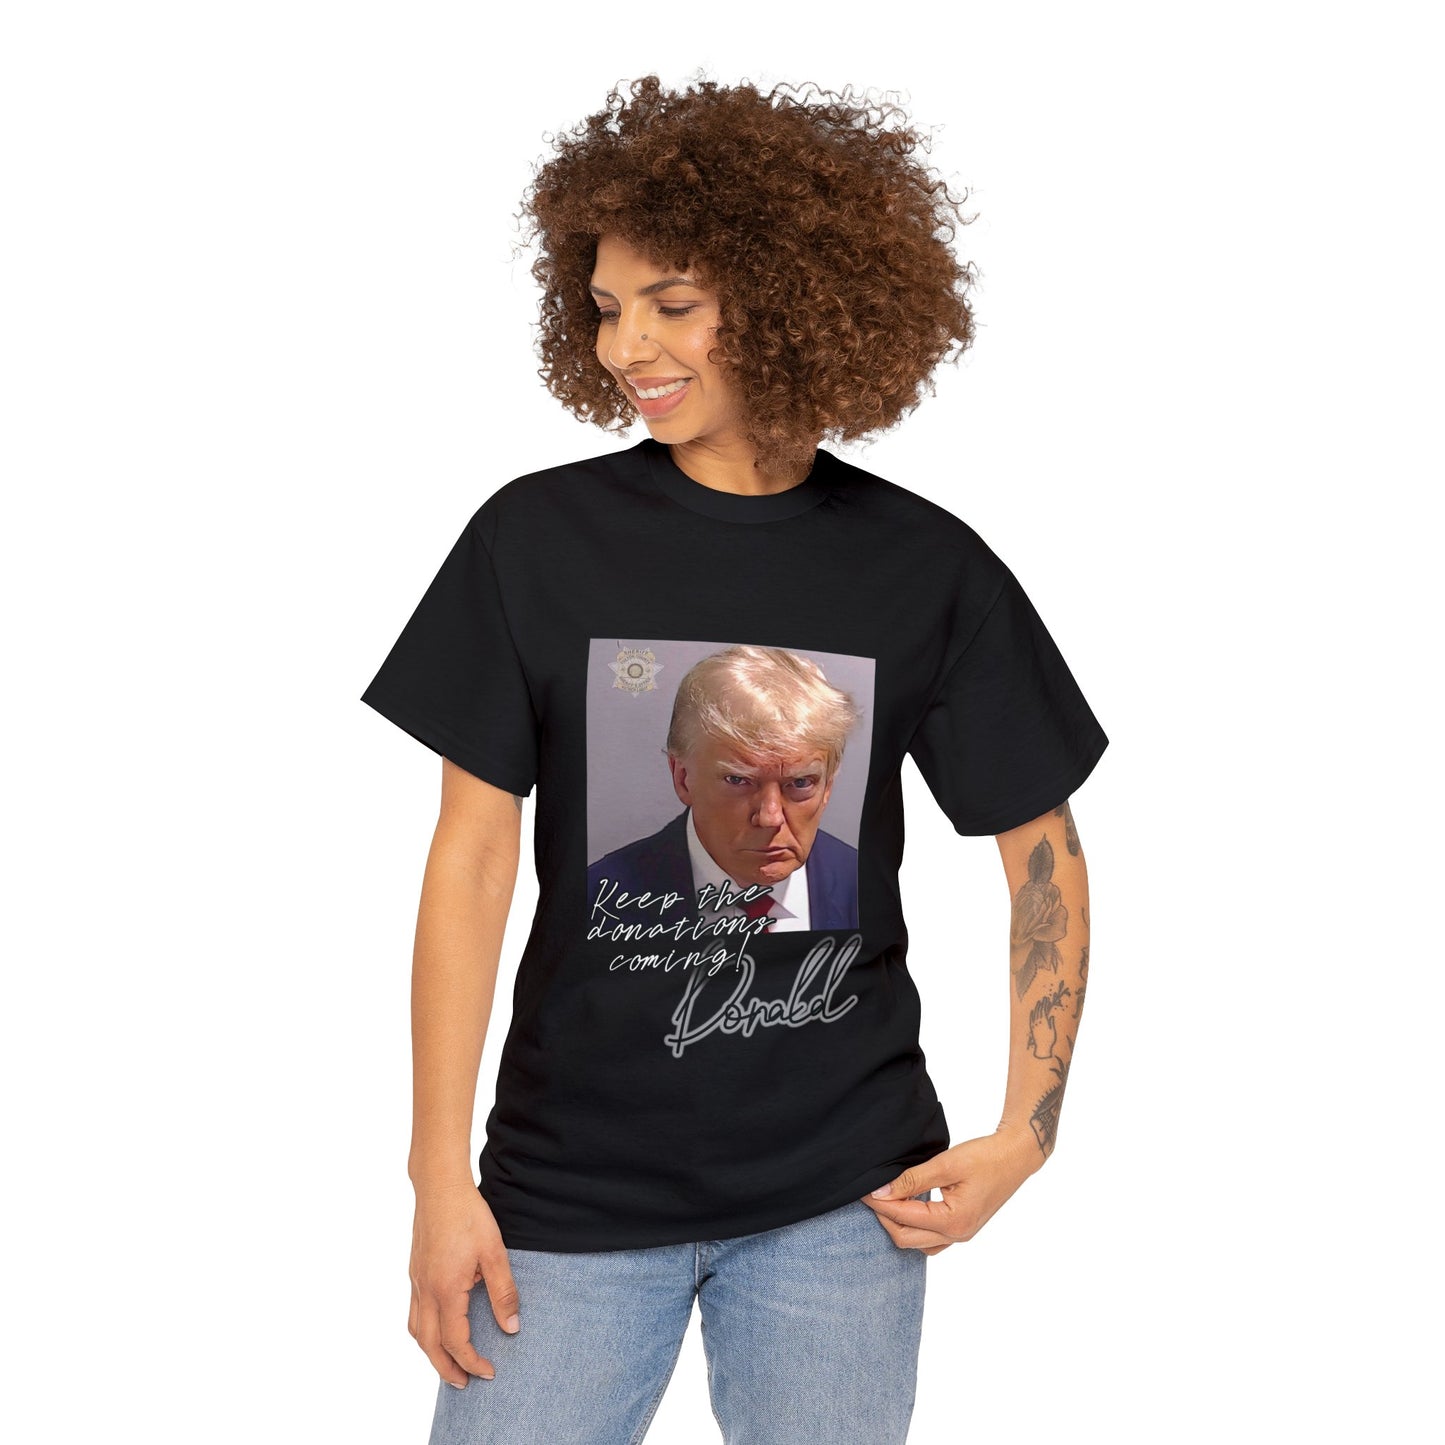 TRUMP POSITIVE T-SHIRT: Mugshot design #2: fundraising mailer  - Unisex Heavy Cotton Tee - Express shipping available